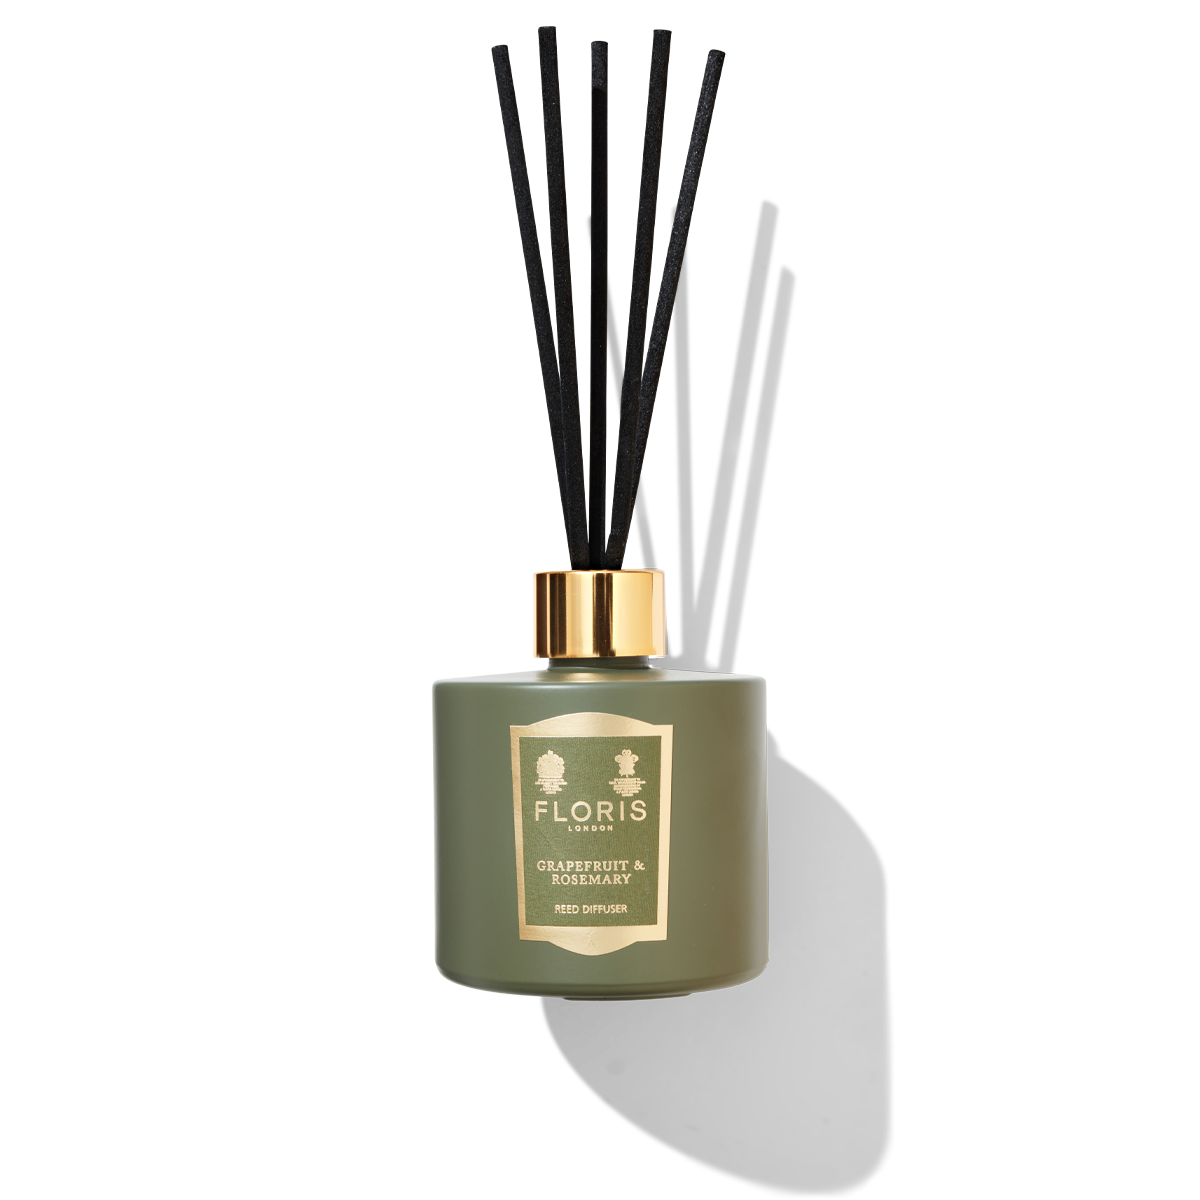 Jungle green reed diffuser with 5 black reeds. a green and gold label with Floris london grapefruit and rosemary printed.